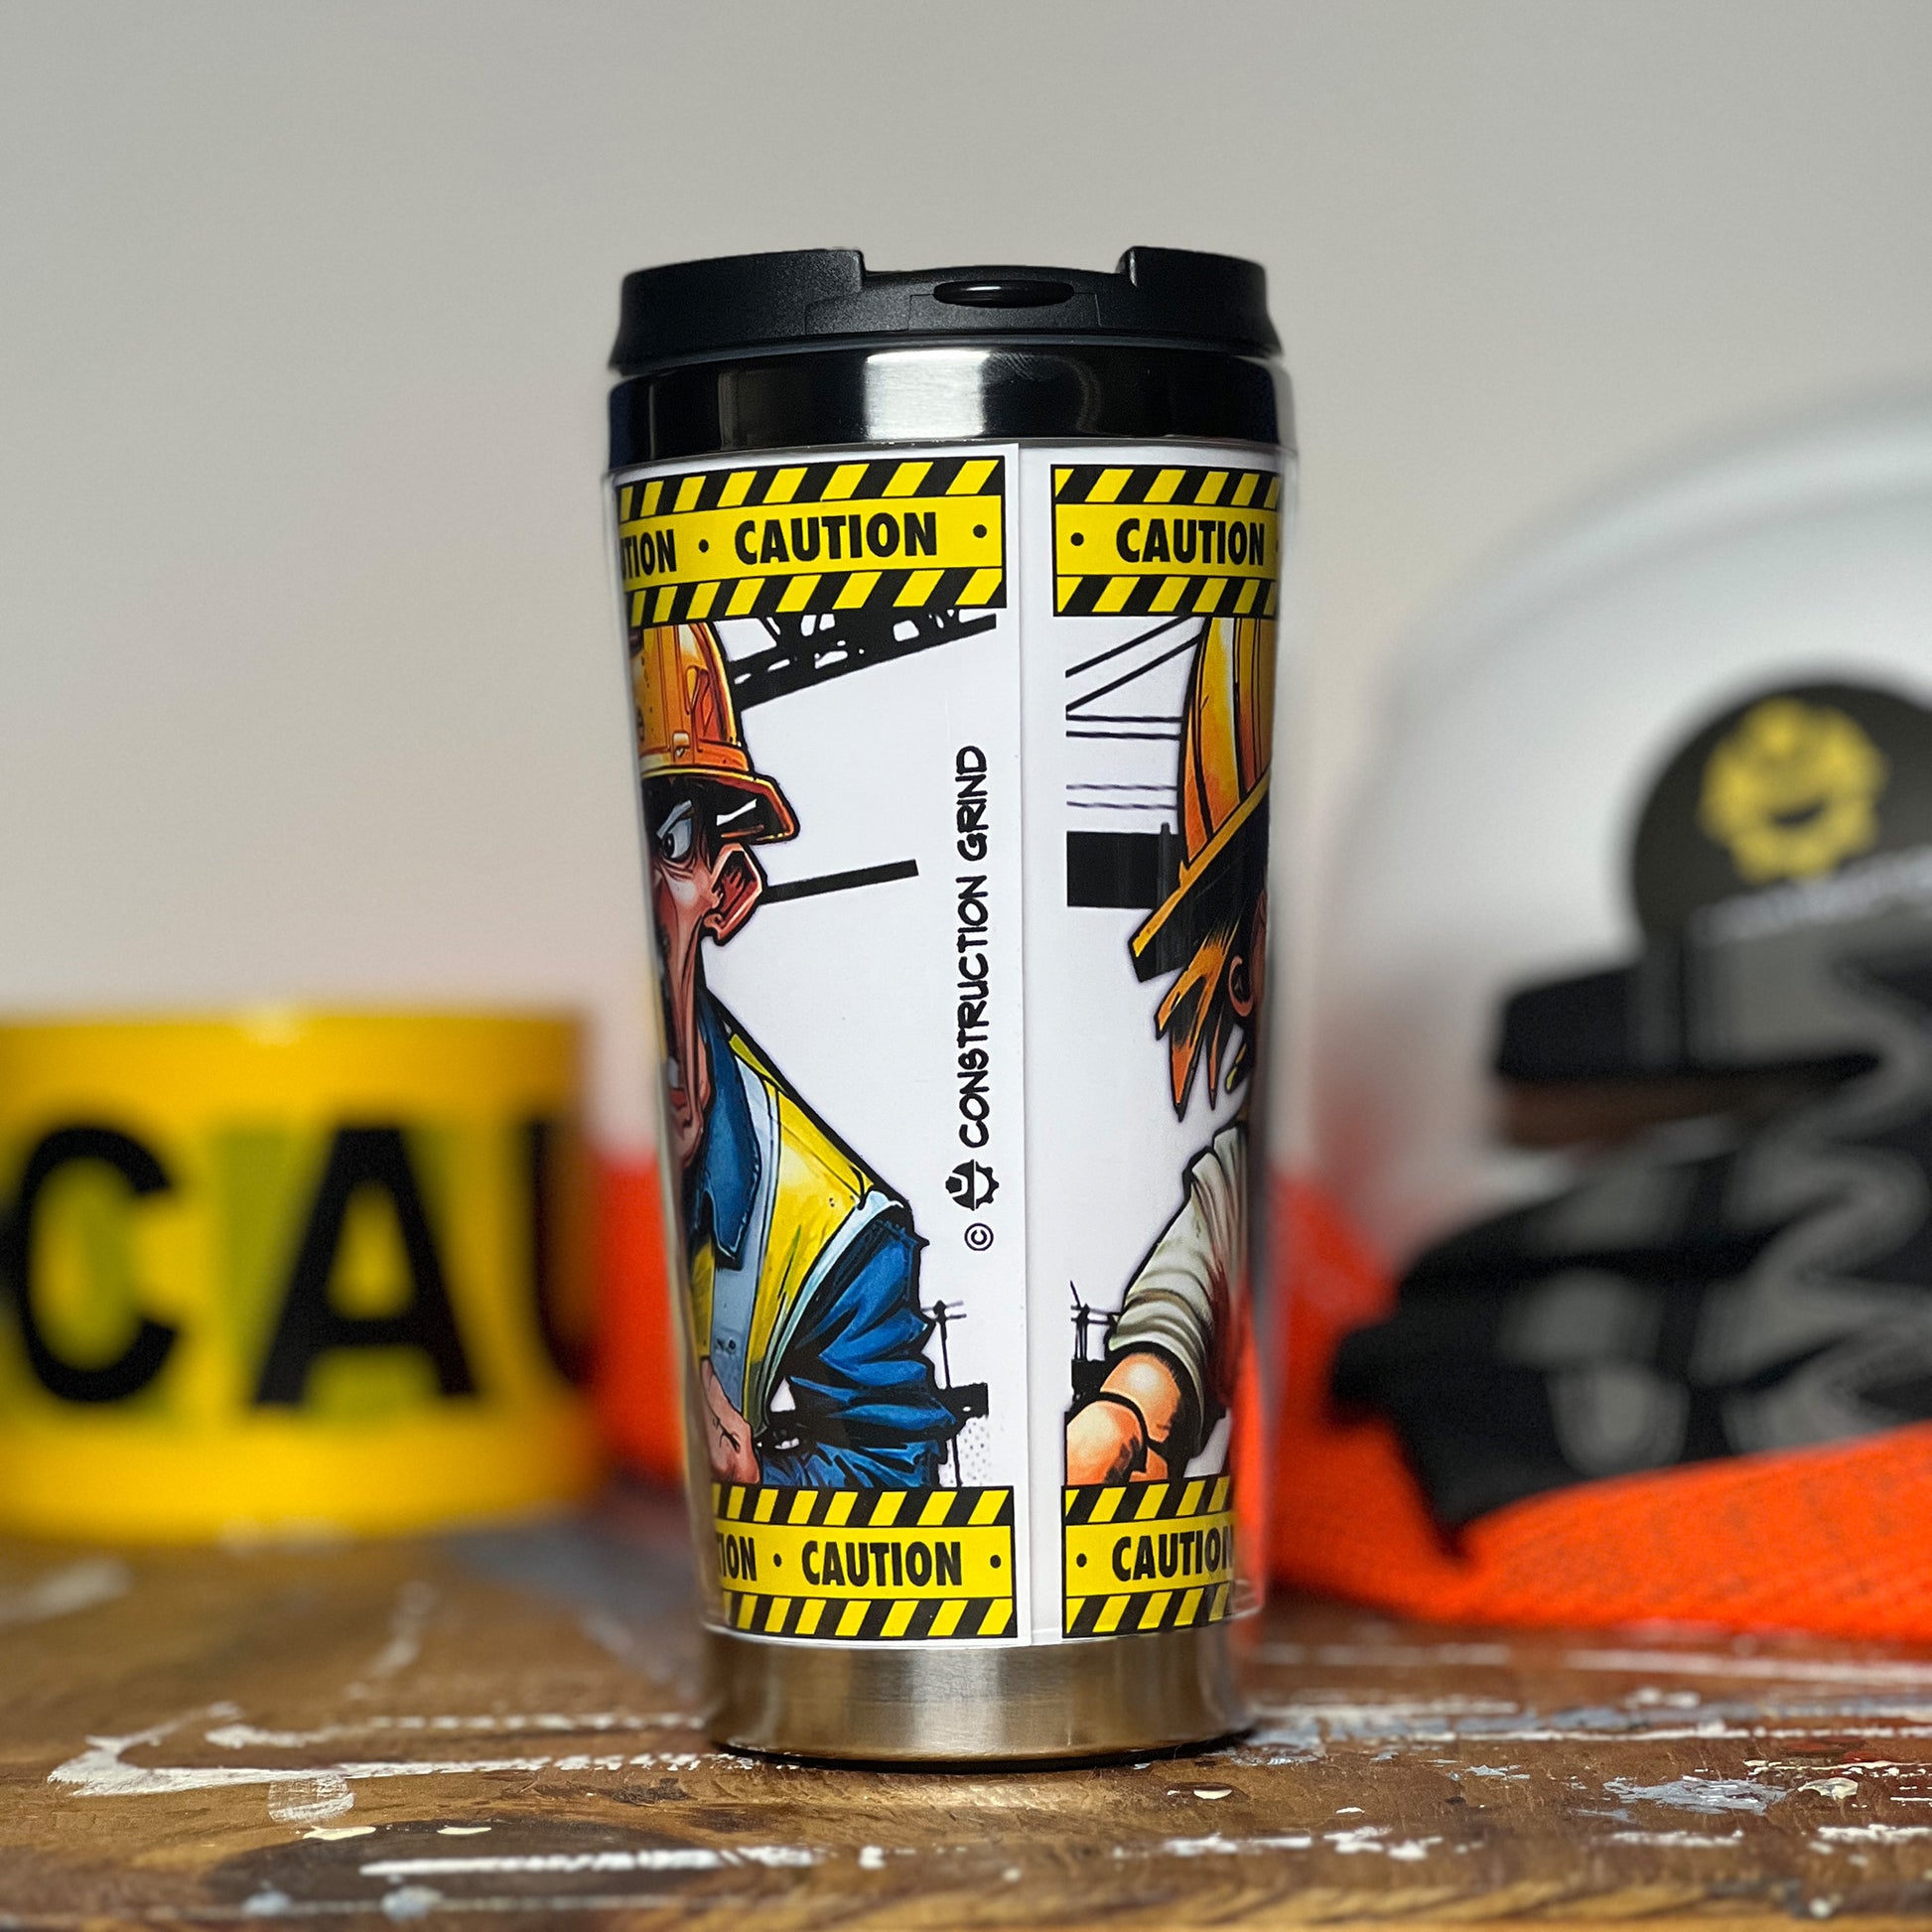 Construction Grind's "Meet the Crew" Second Shift 12 oz. coffee tumbler. Showing the rear image seam and our logo.